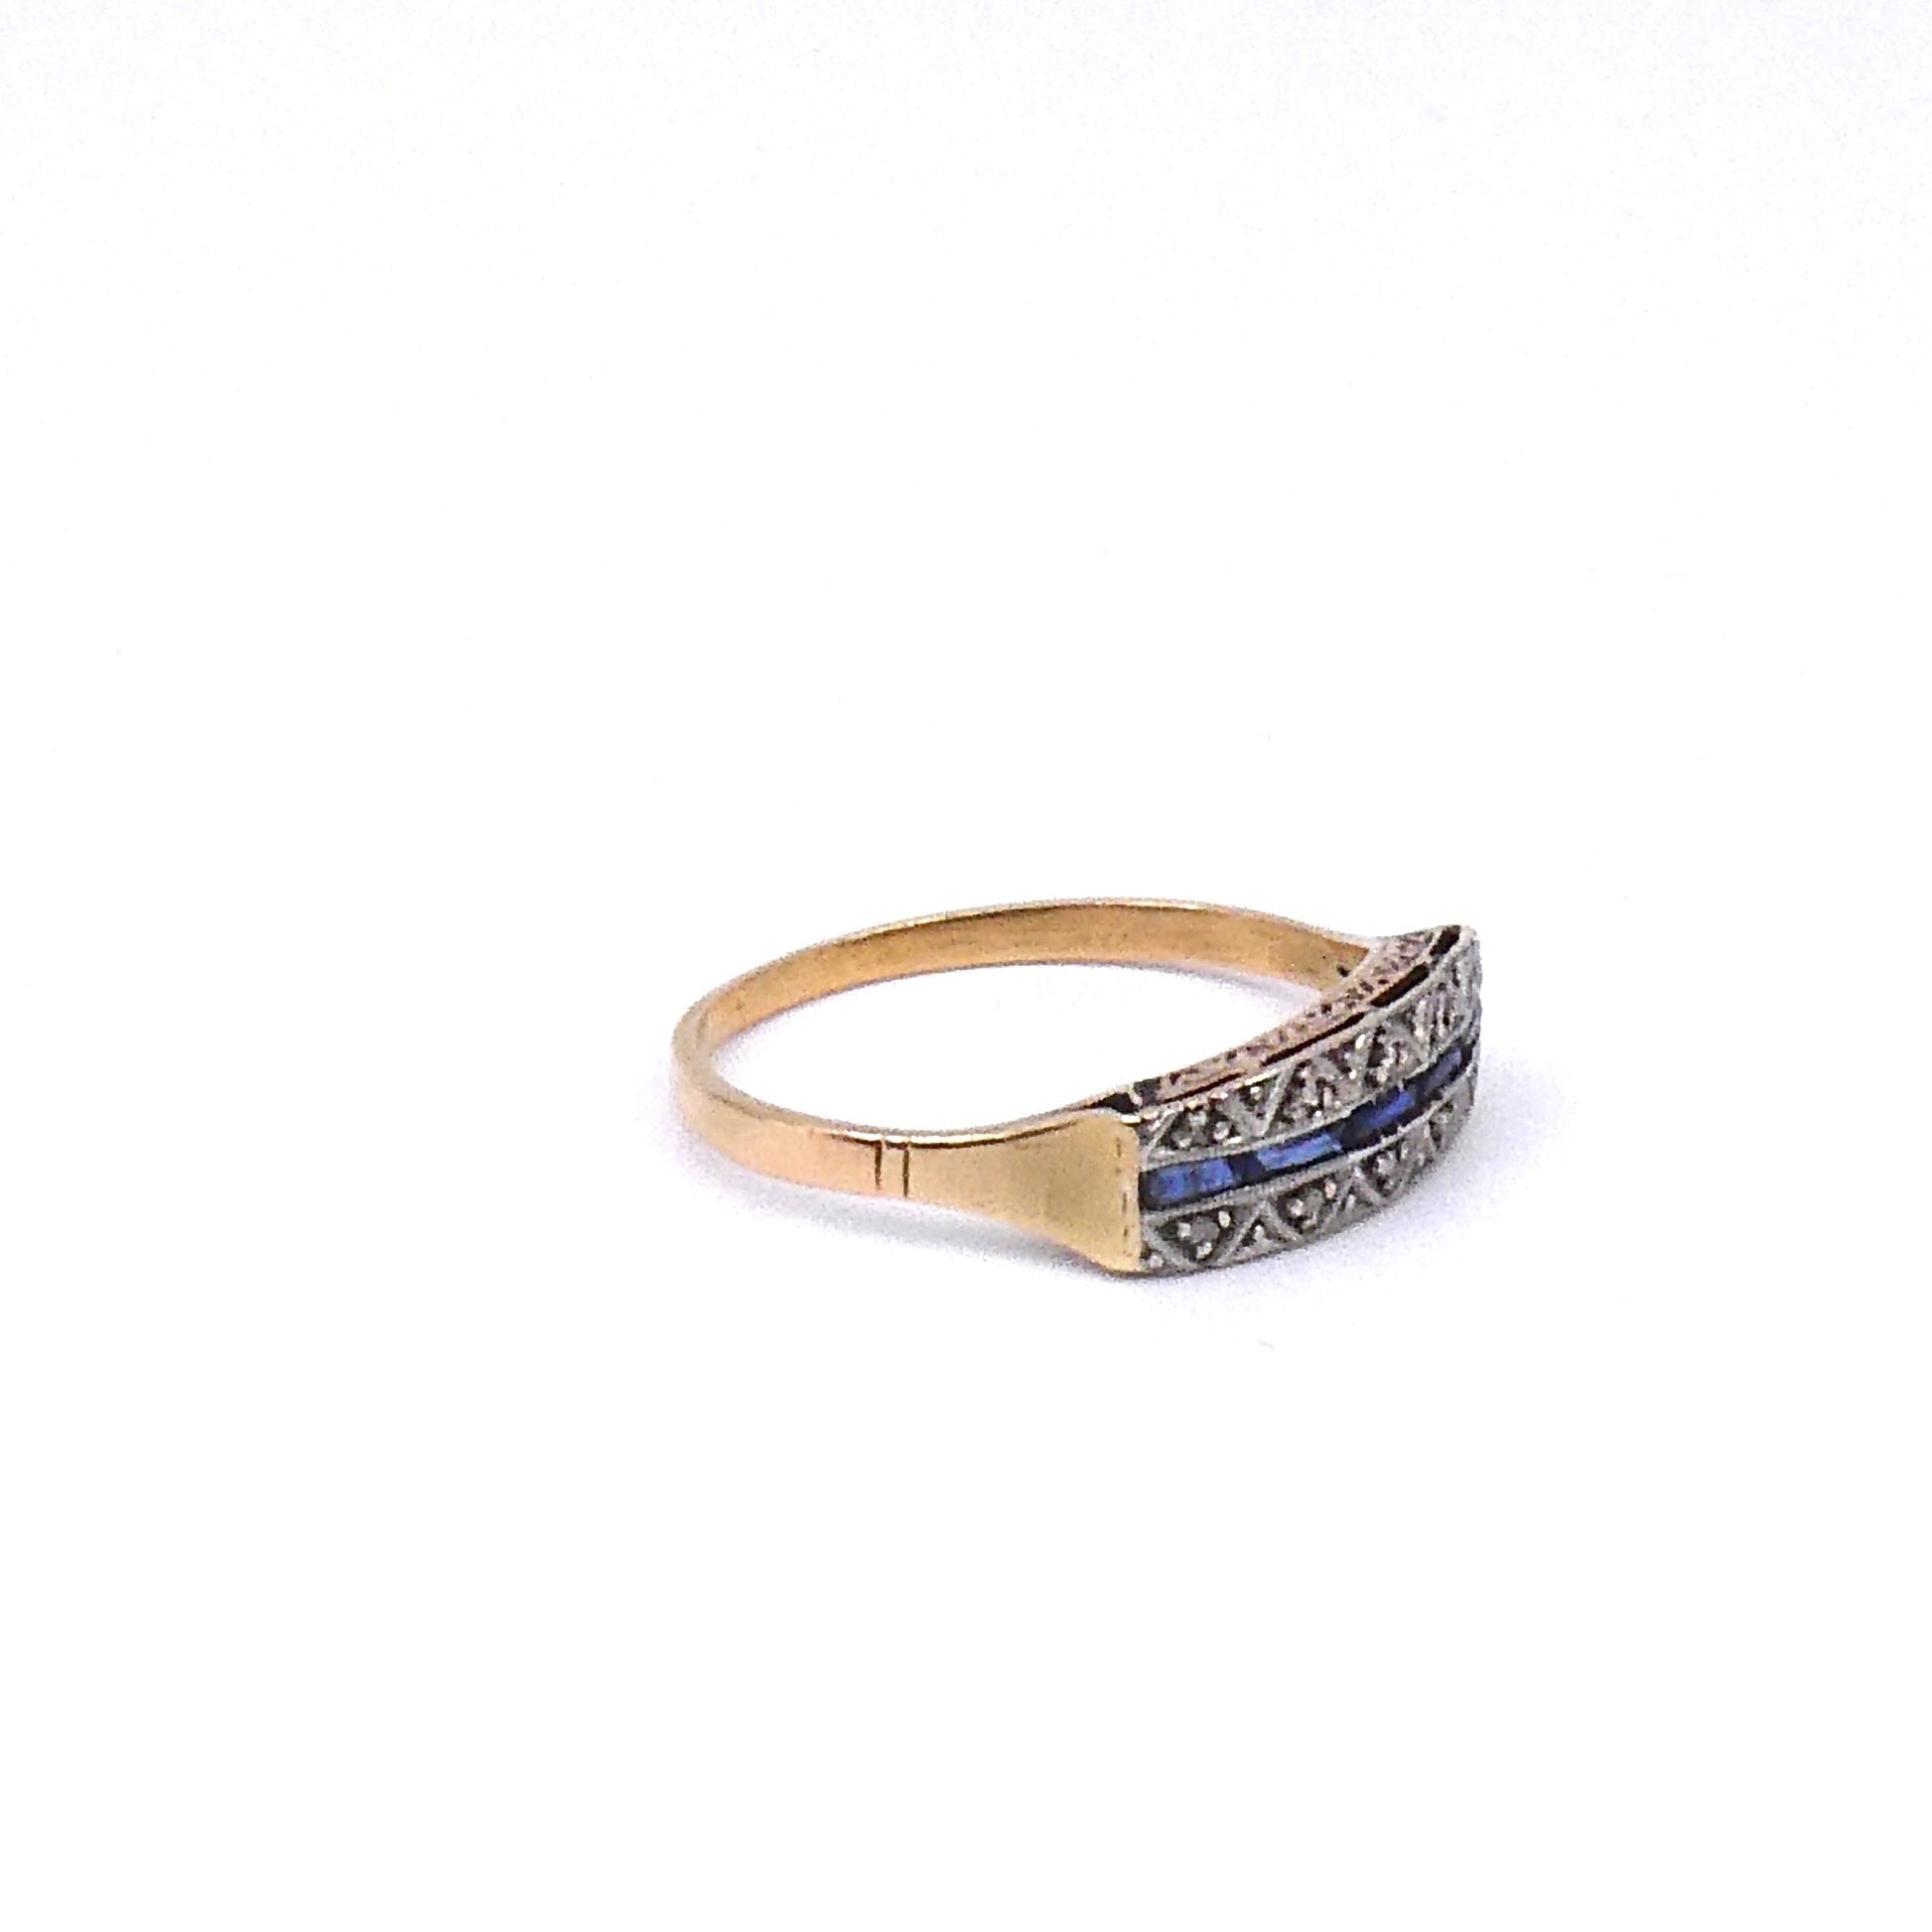 Art Deco style sapphire, platinum ring in 18k gold, an ideal sapphire ring for everyday. - Collected